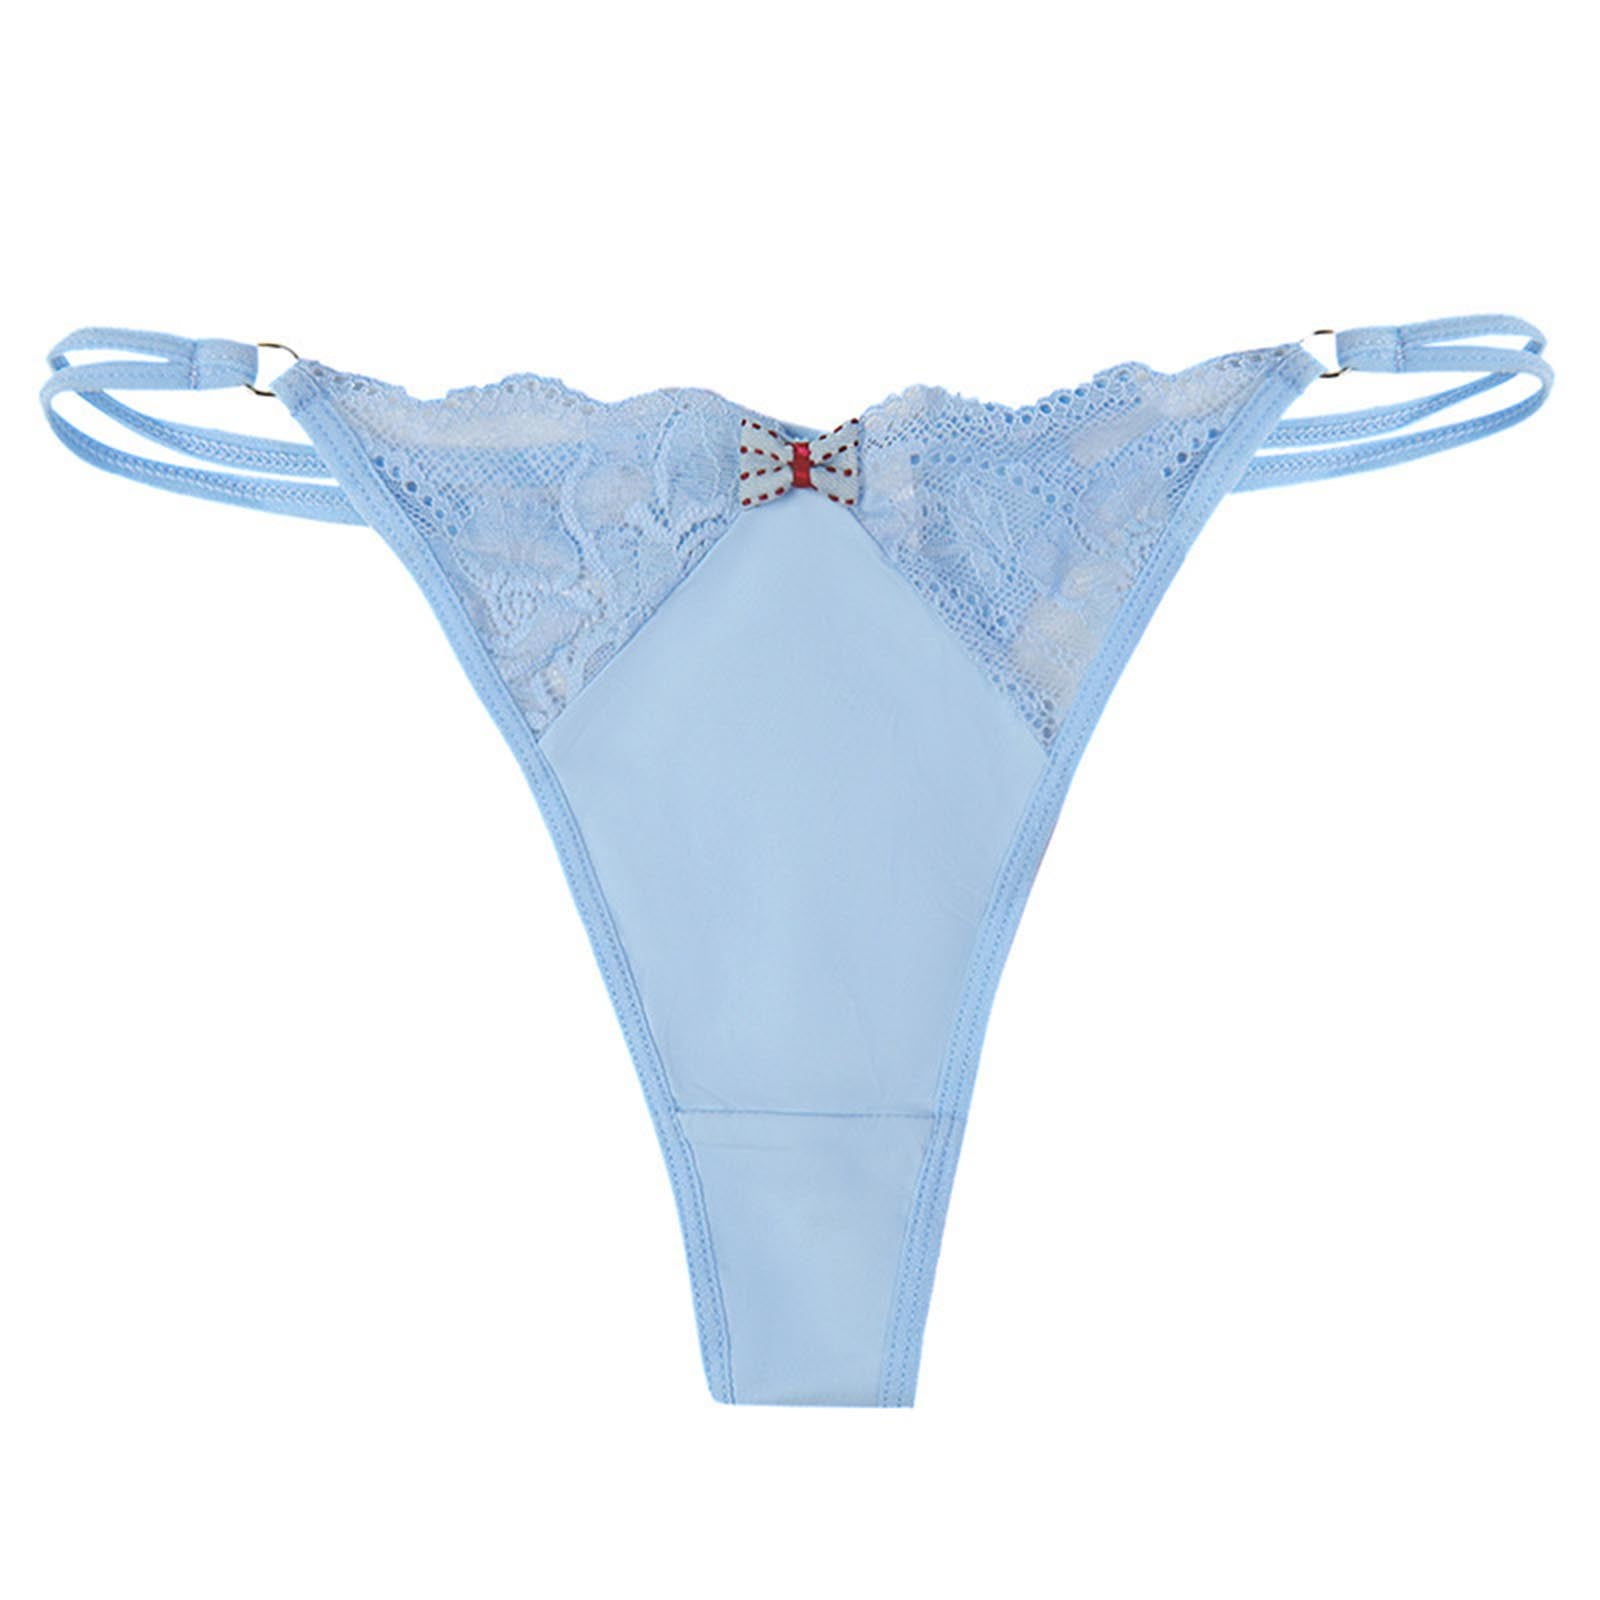 See Through Lingerie For Women Thongs No Show Panties Underwear Low ...